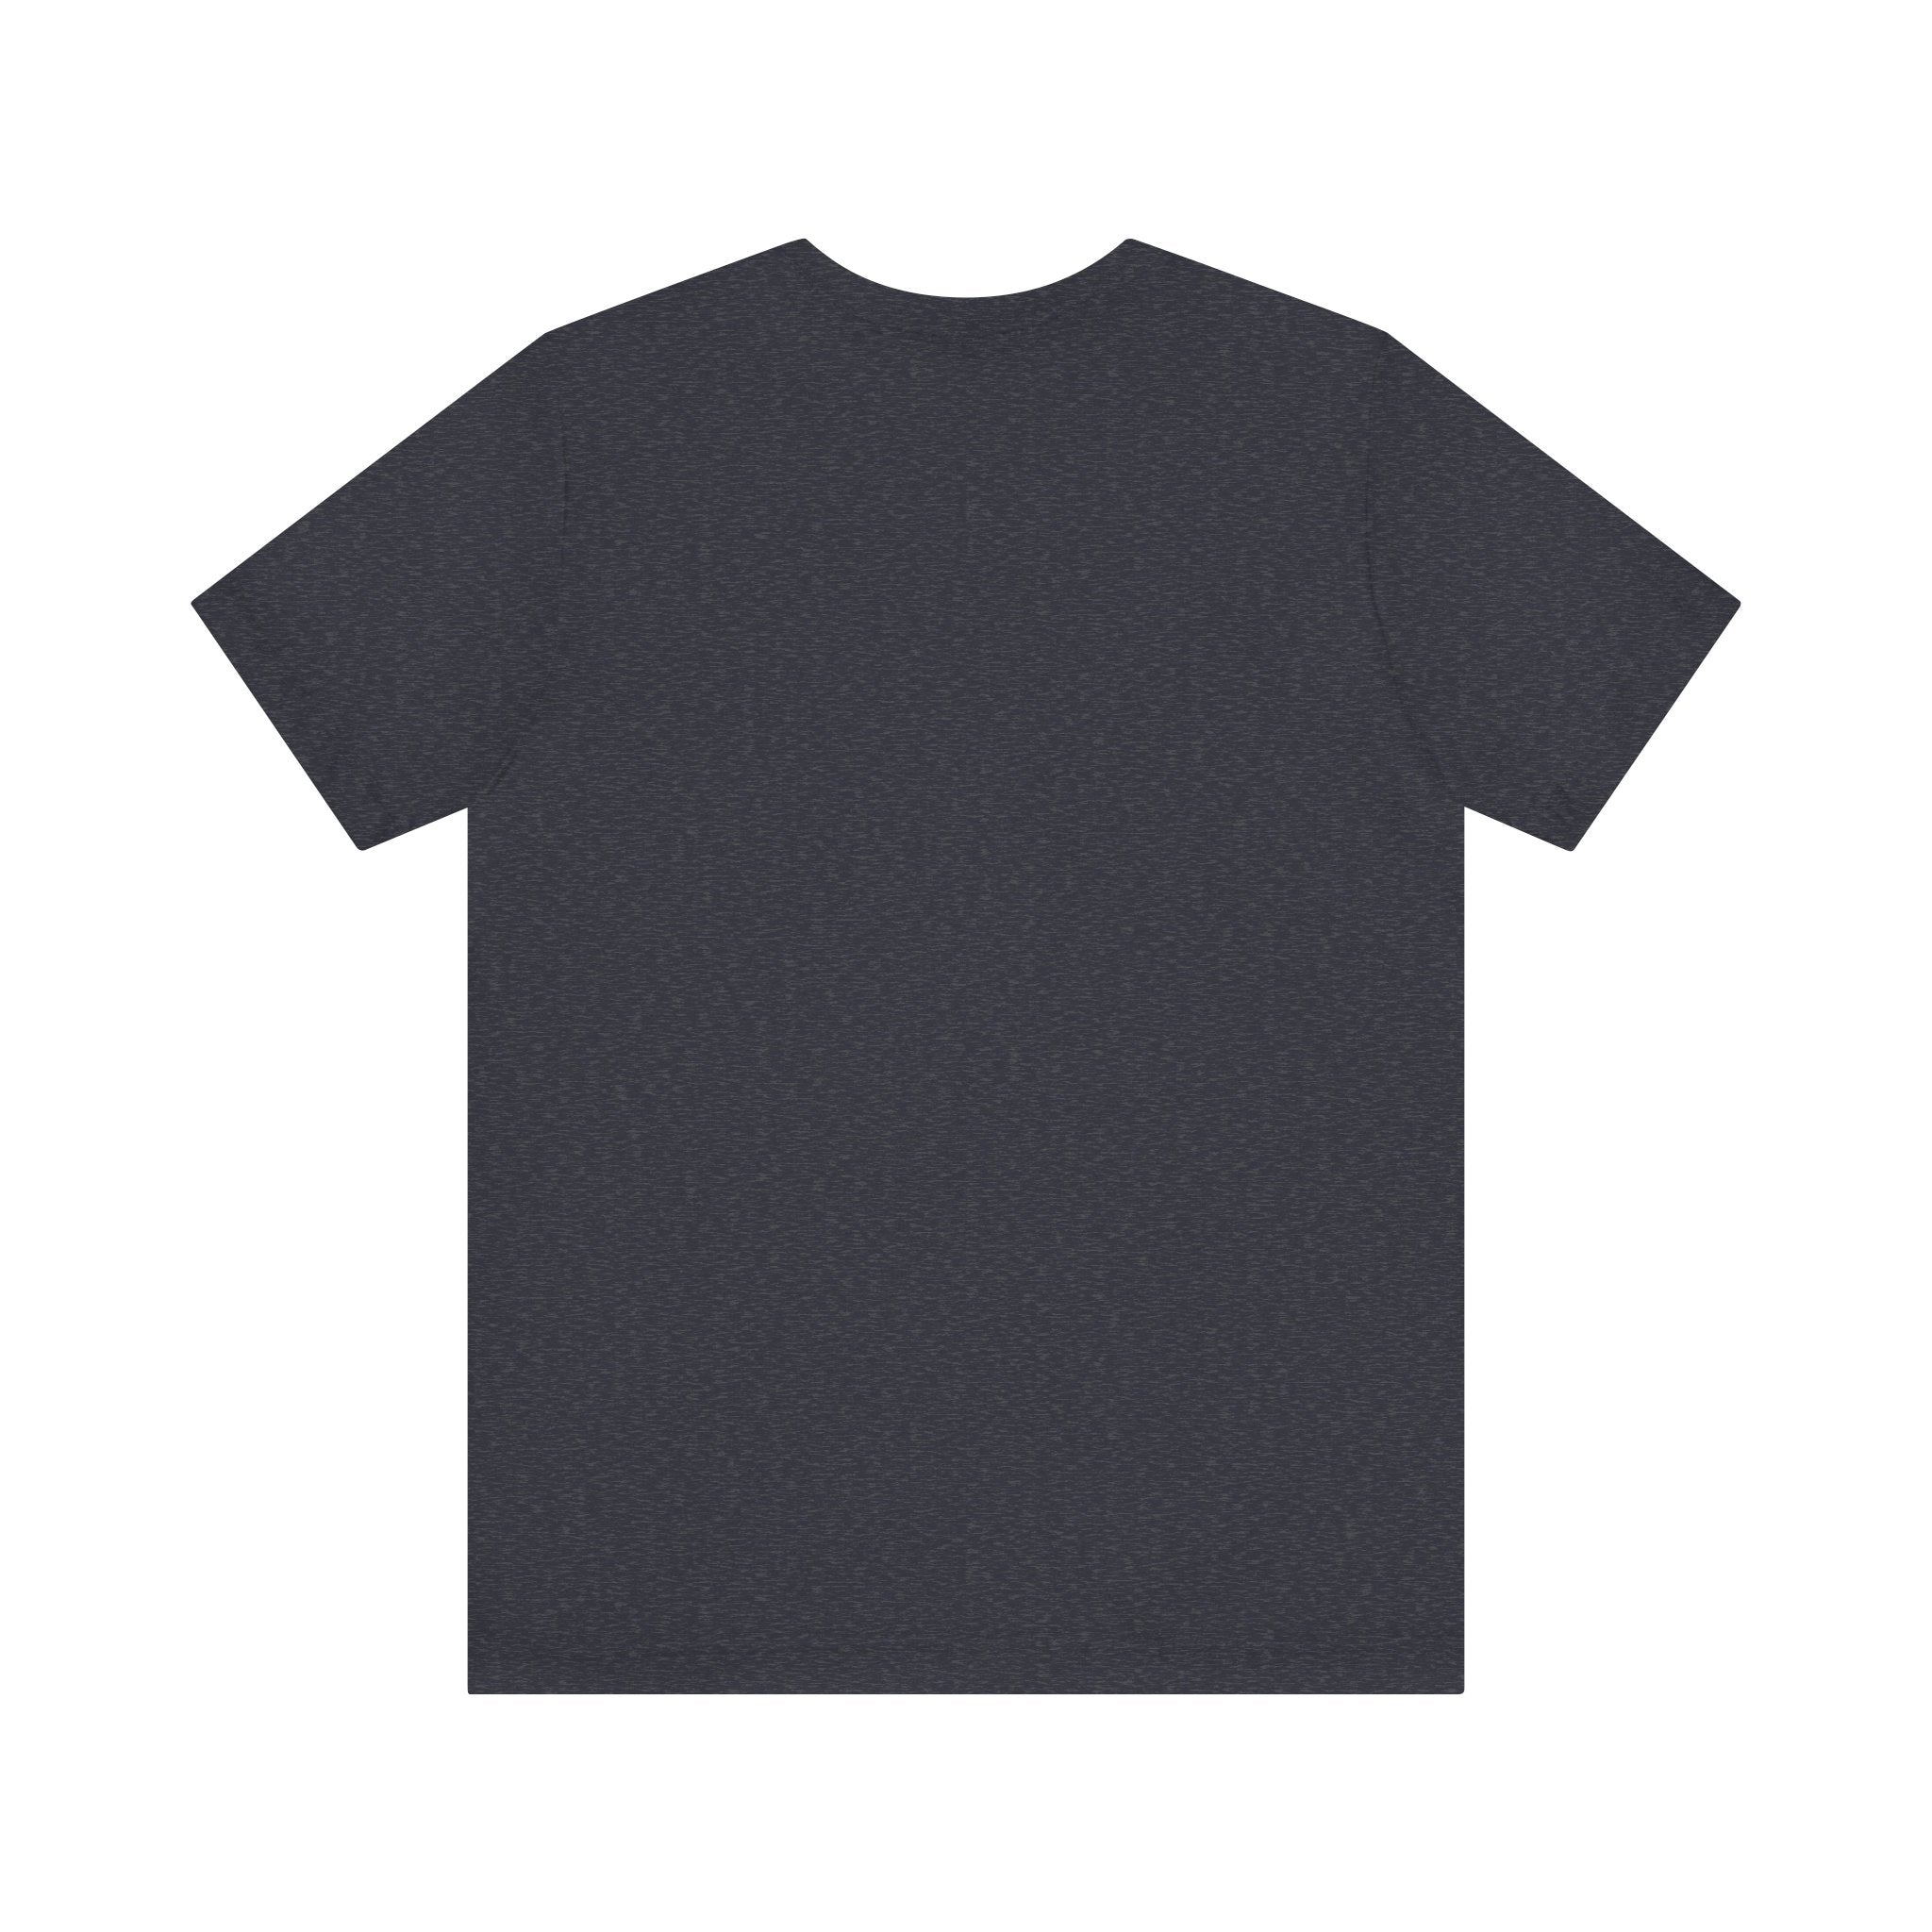 A dark gray Binary Rain Cloud - T-Shirt crafted from luxurious ring-spun cotton is displayed on a plain white background, shown from the back.